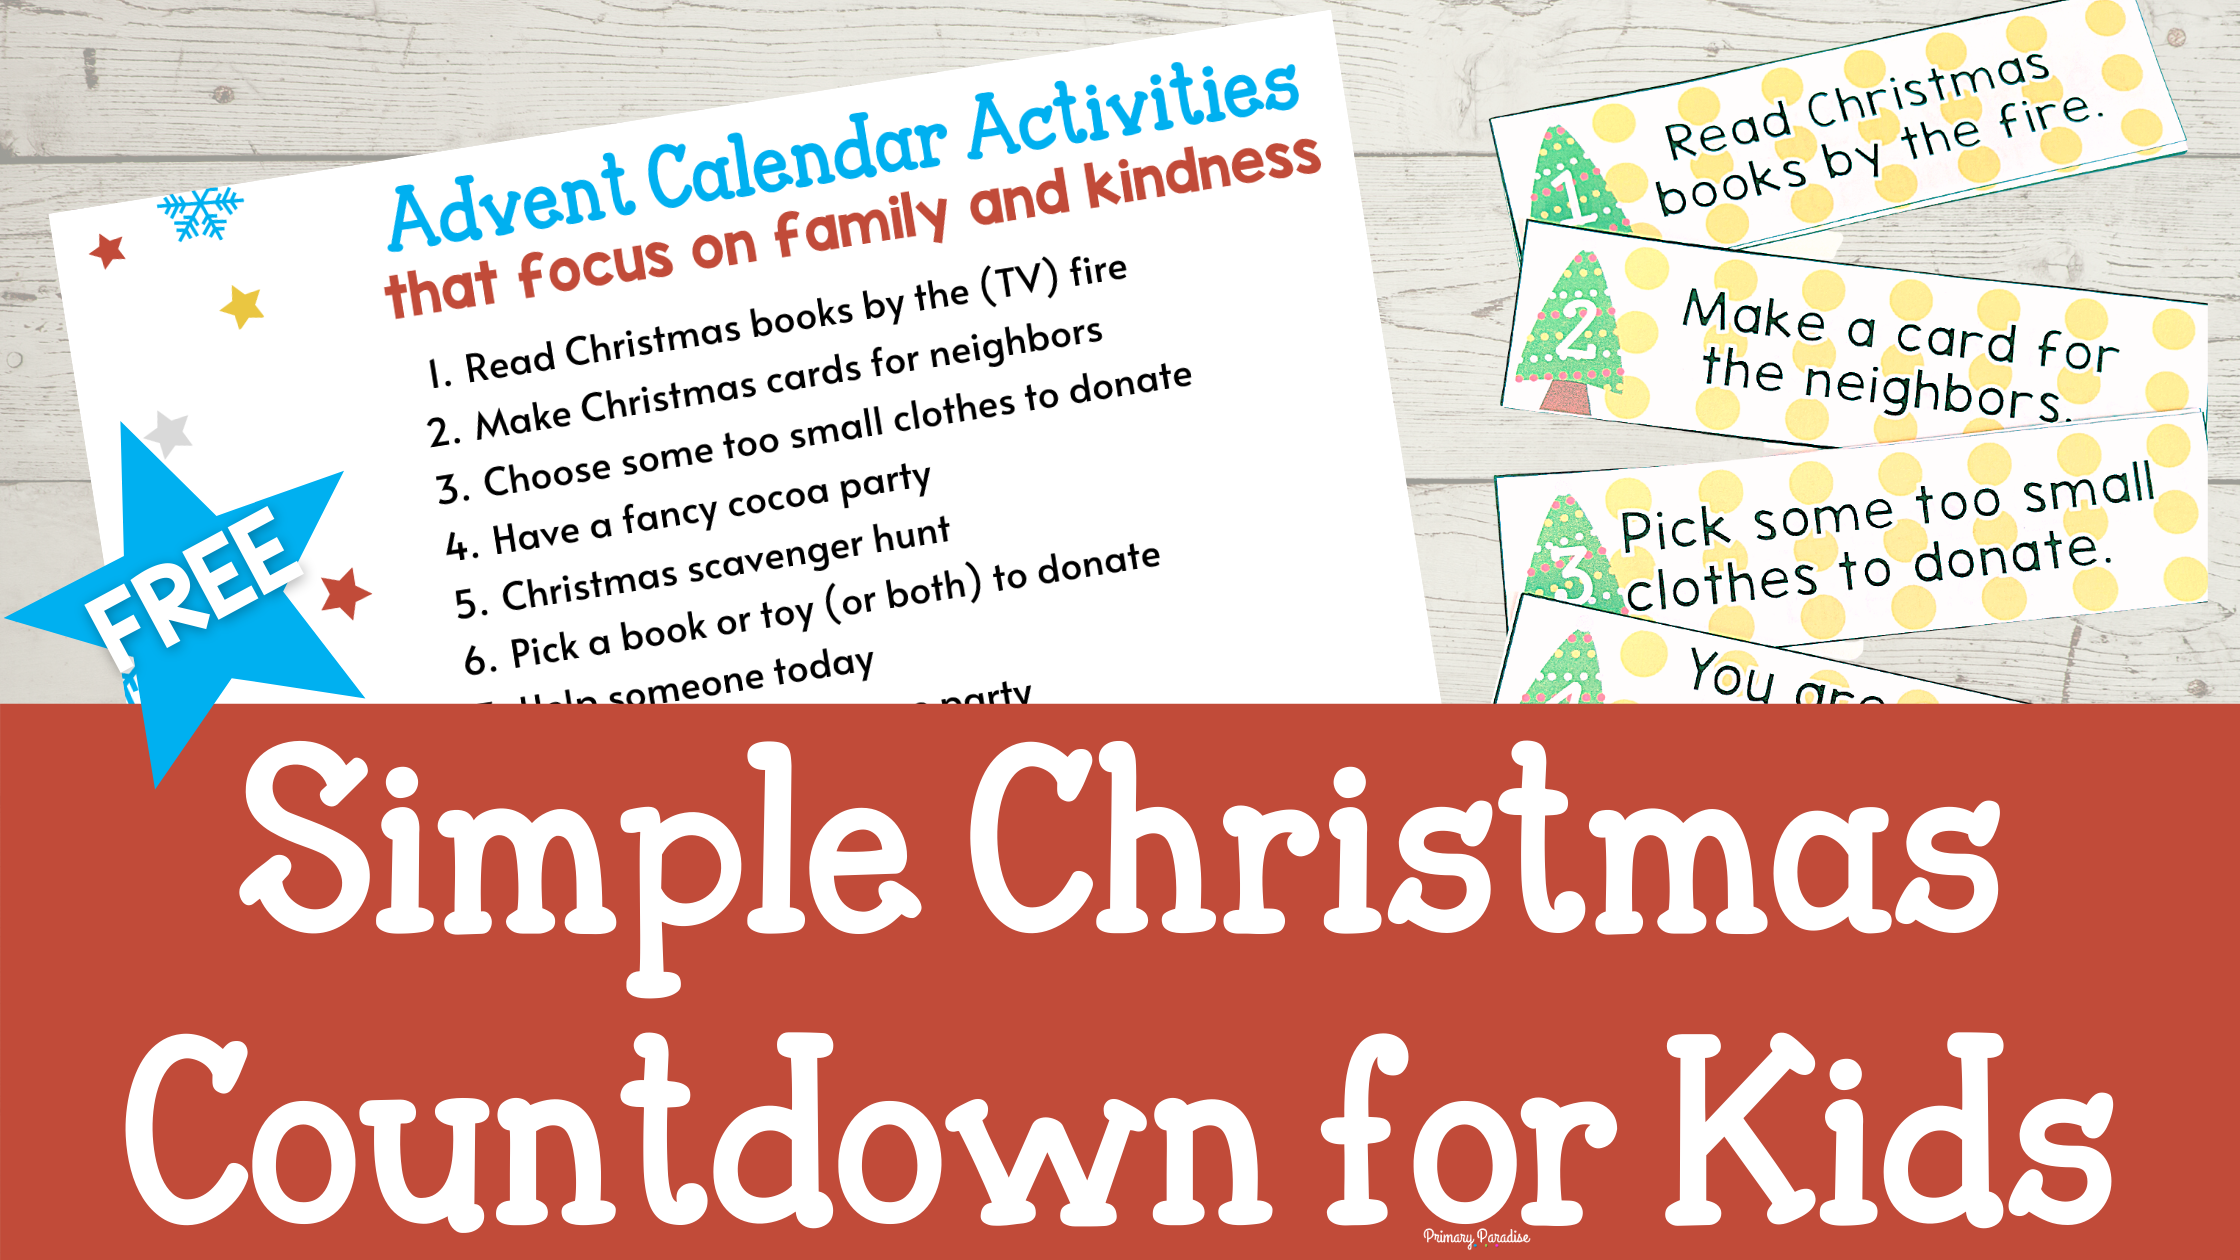 Simple Christmas Countdown Activities for Kids